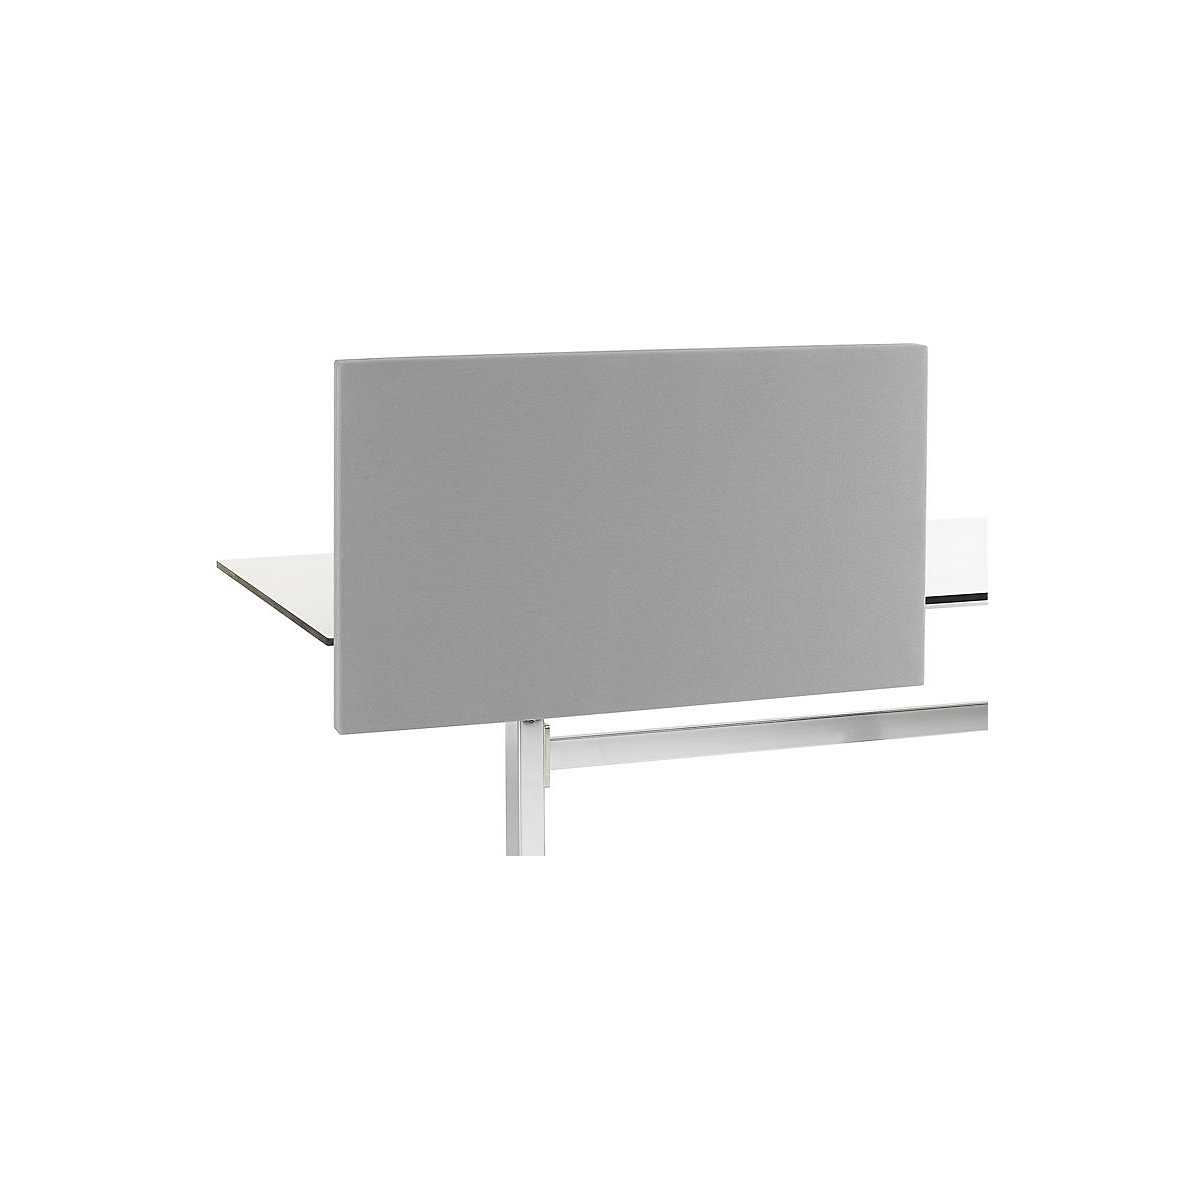 Standard acoustic desk partition with straight corners, HxW 650 x 1600 mm, fabric, grey-1